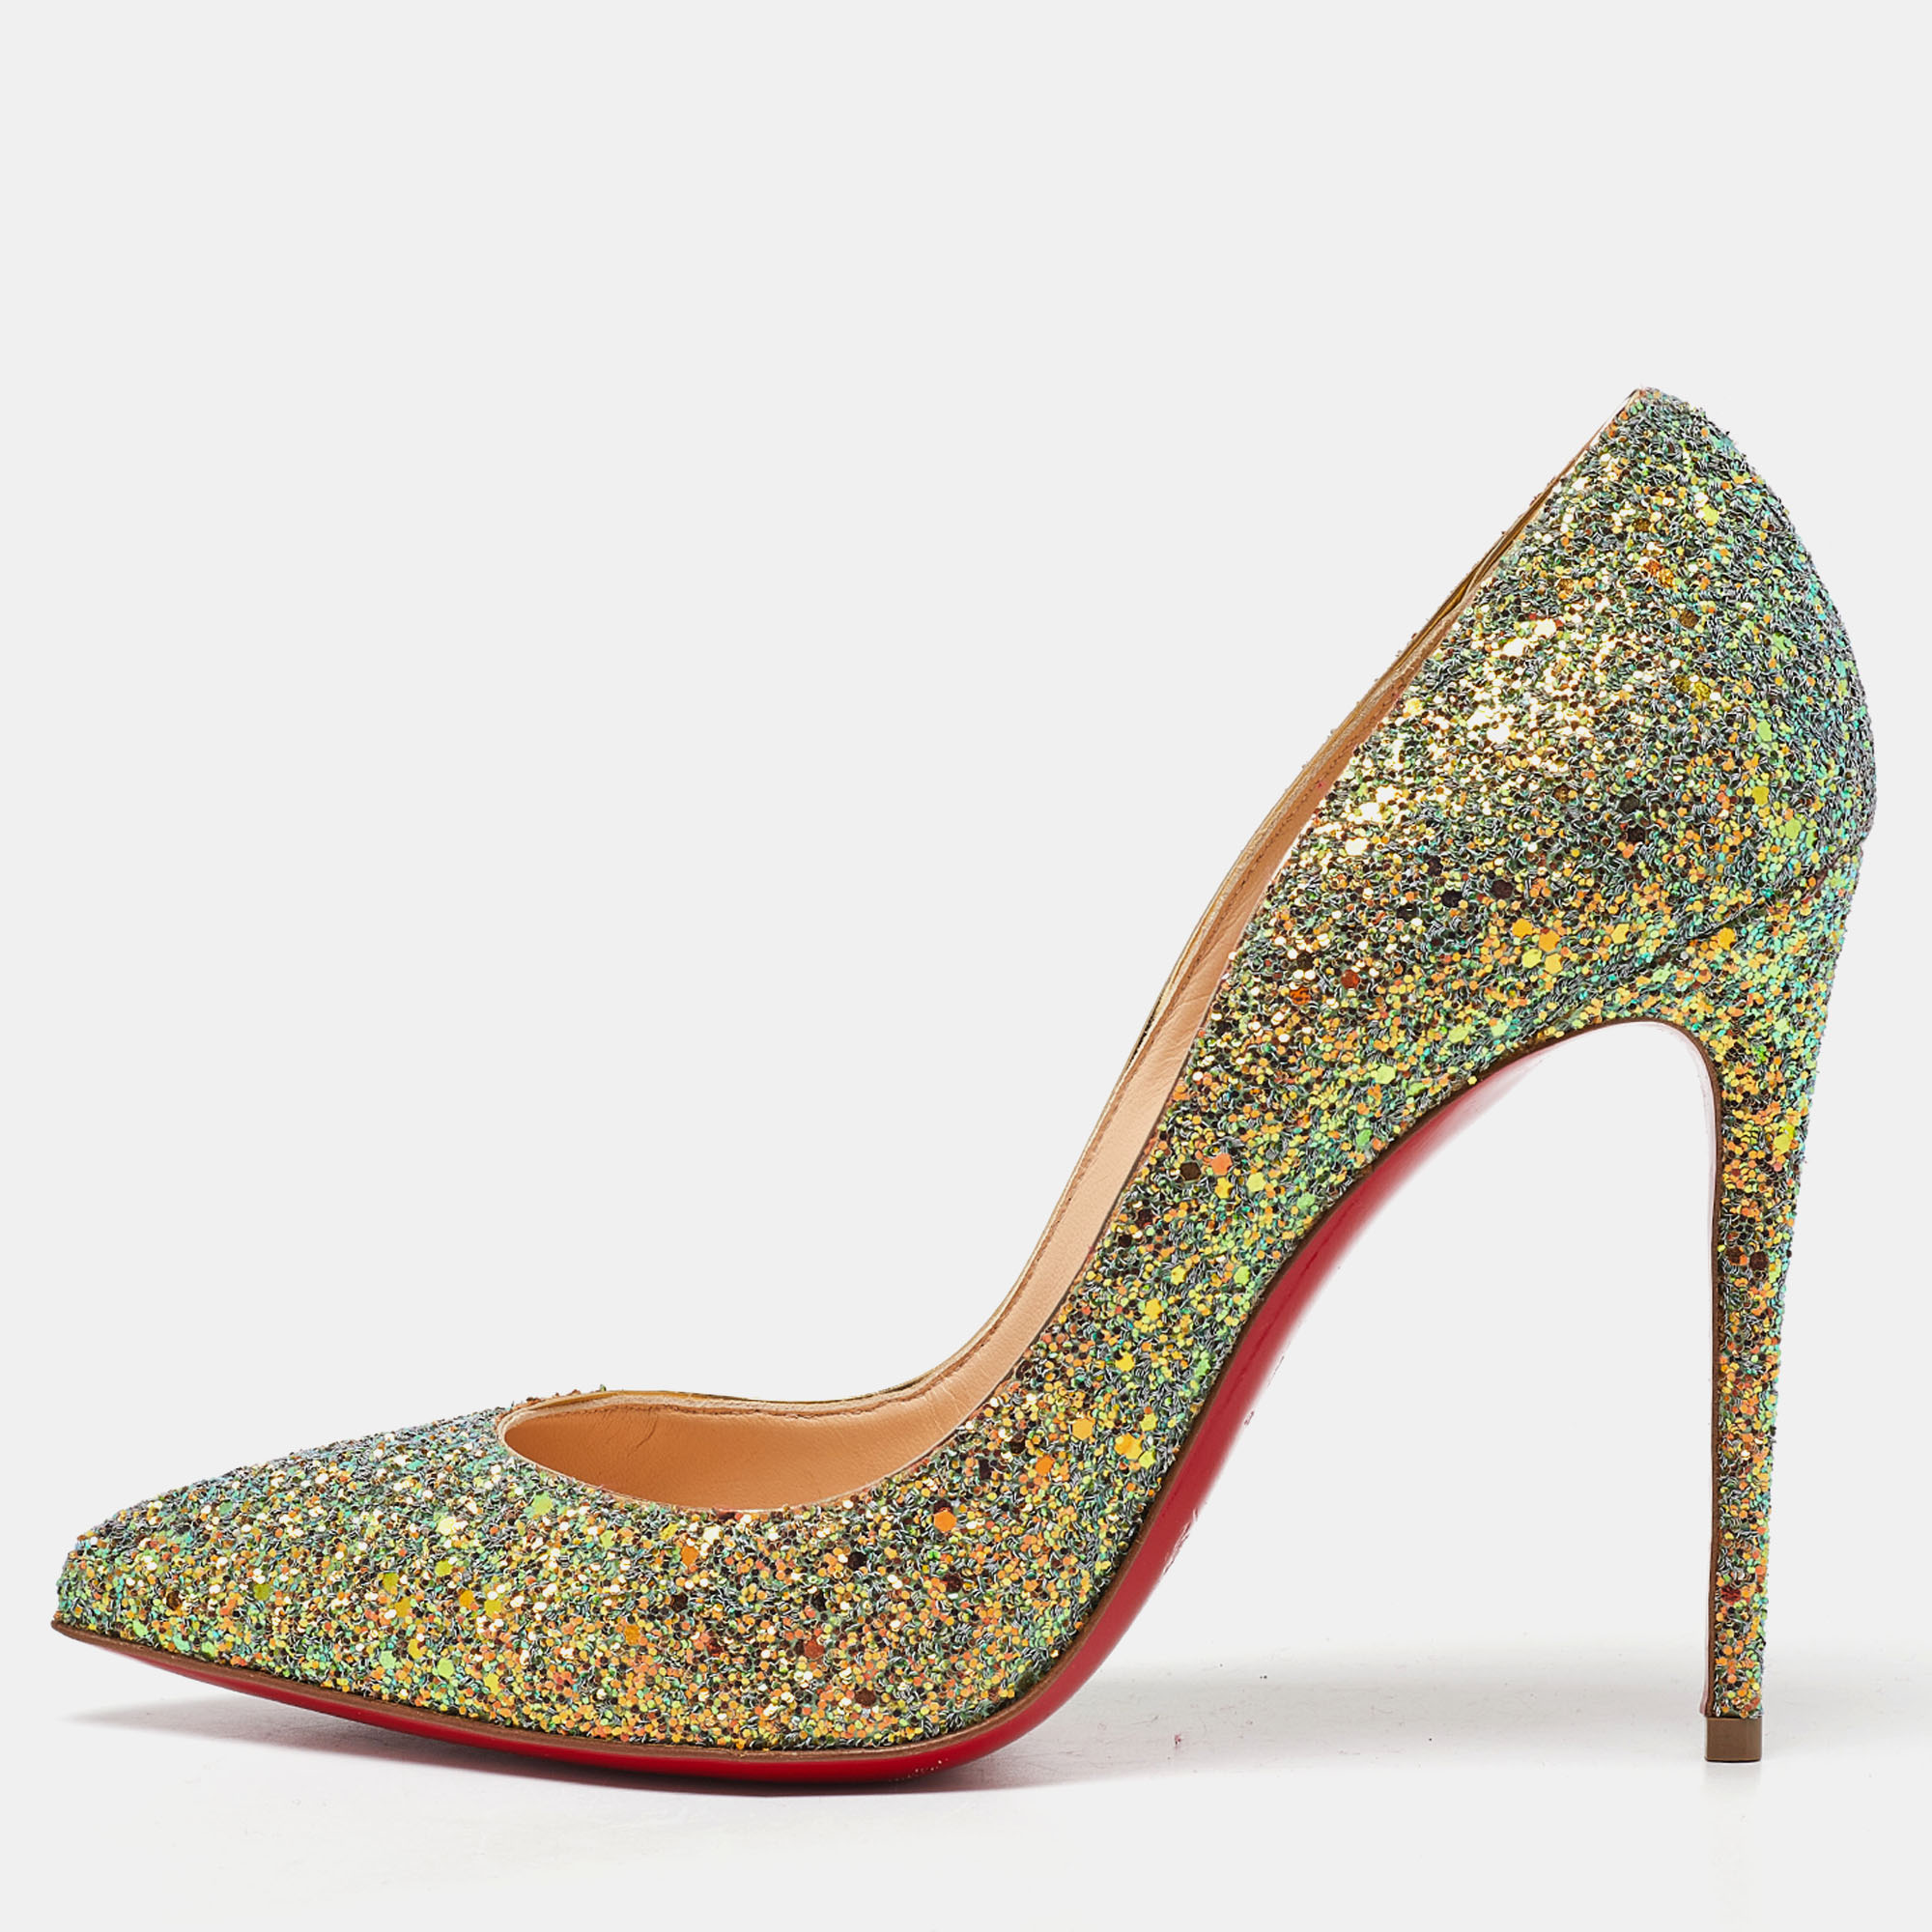 Pre-owned Christian Louboutin Gold/green Glitter Pigalle Follies Pumps Size 40.5